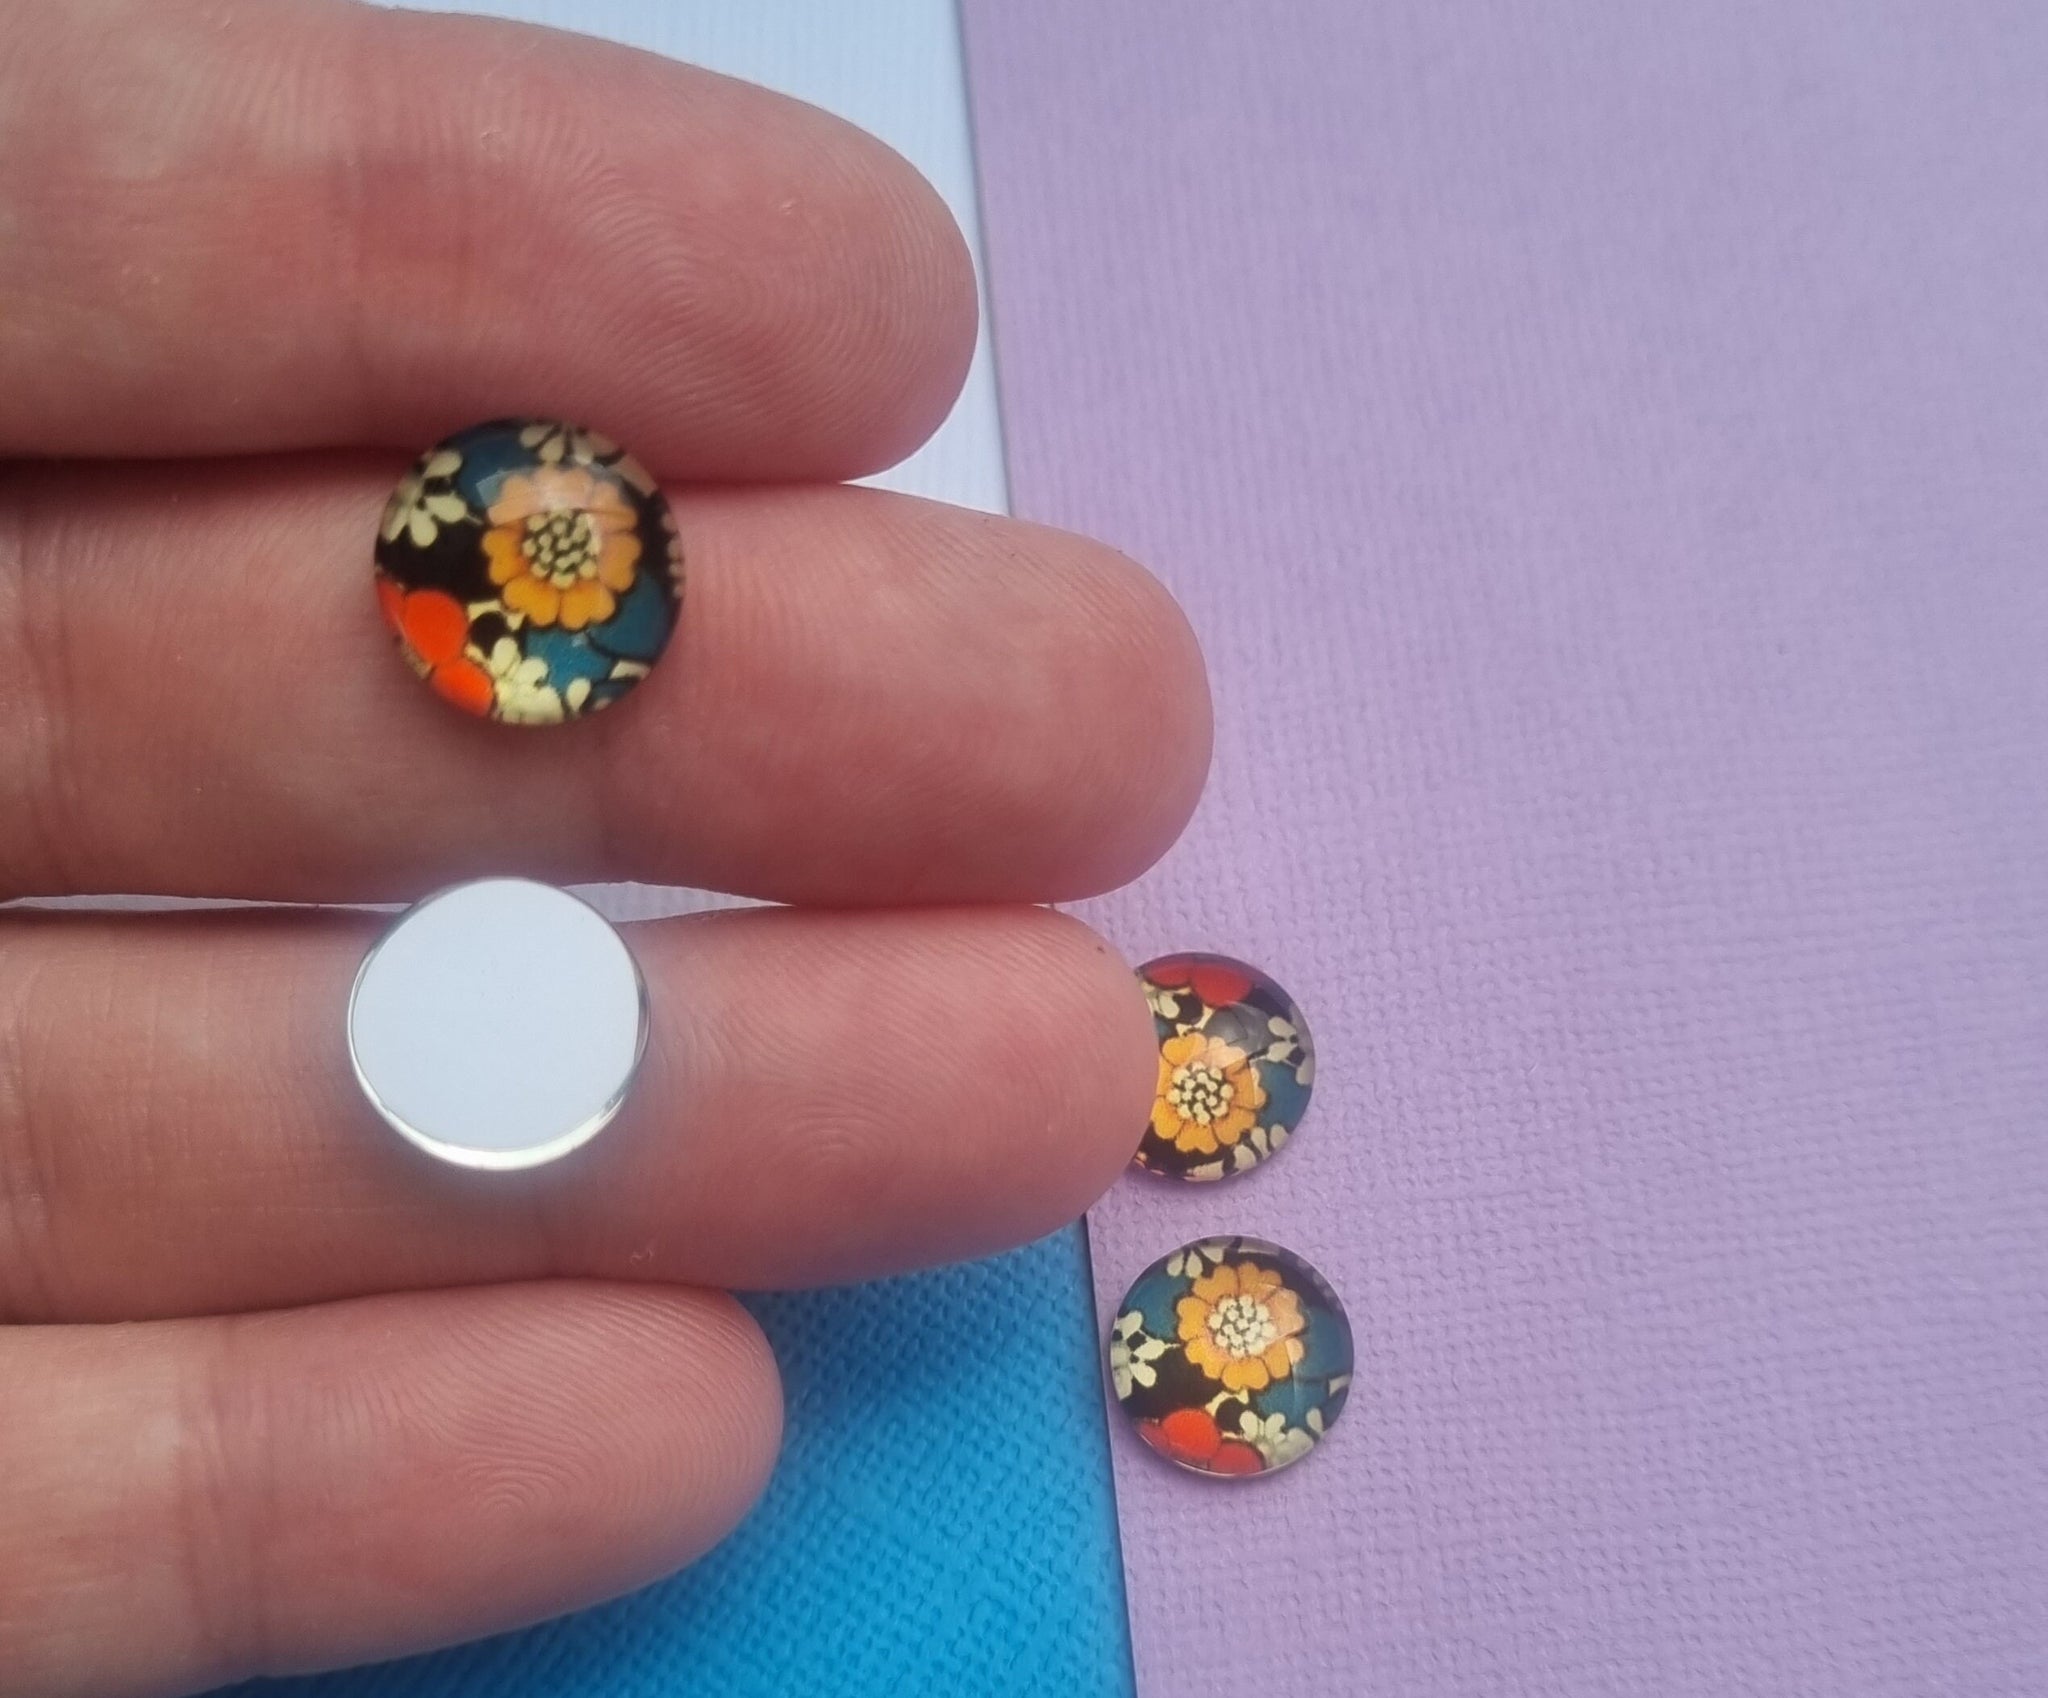 10pcs(5prs) 12mm flower cabochon, Glass Cabochons, Cabochons for jewellery, jewellery making Supplies, earring supplies, diy jewellery